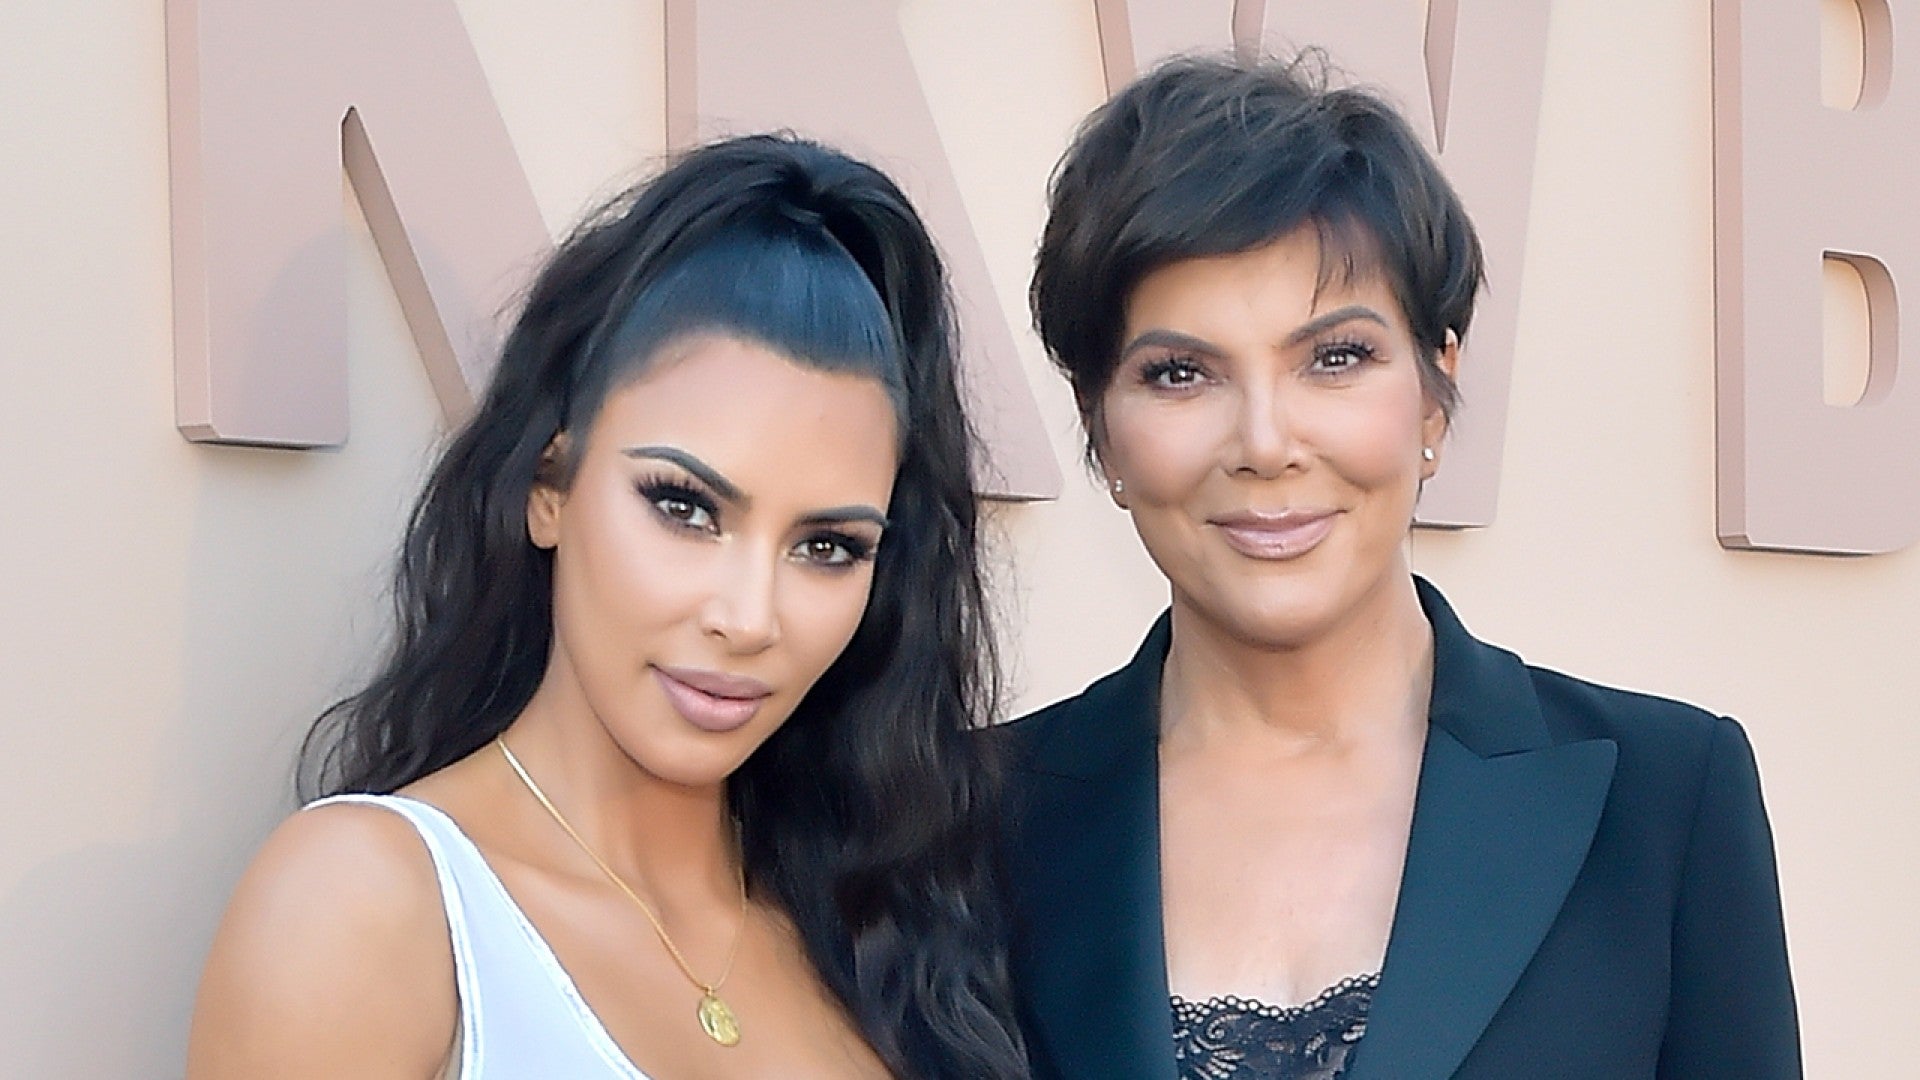 Kim Kardashian's make-up artist Mario Dedivanovic comes out in powerful  speech, The Independent